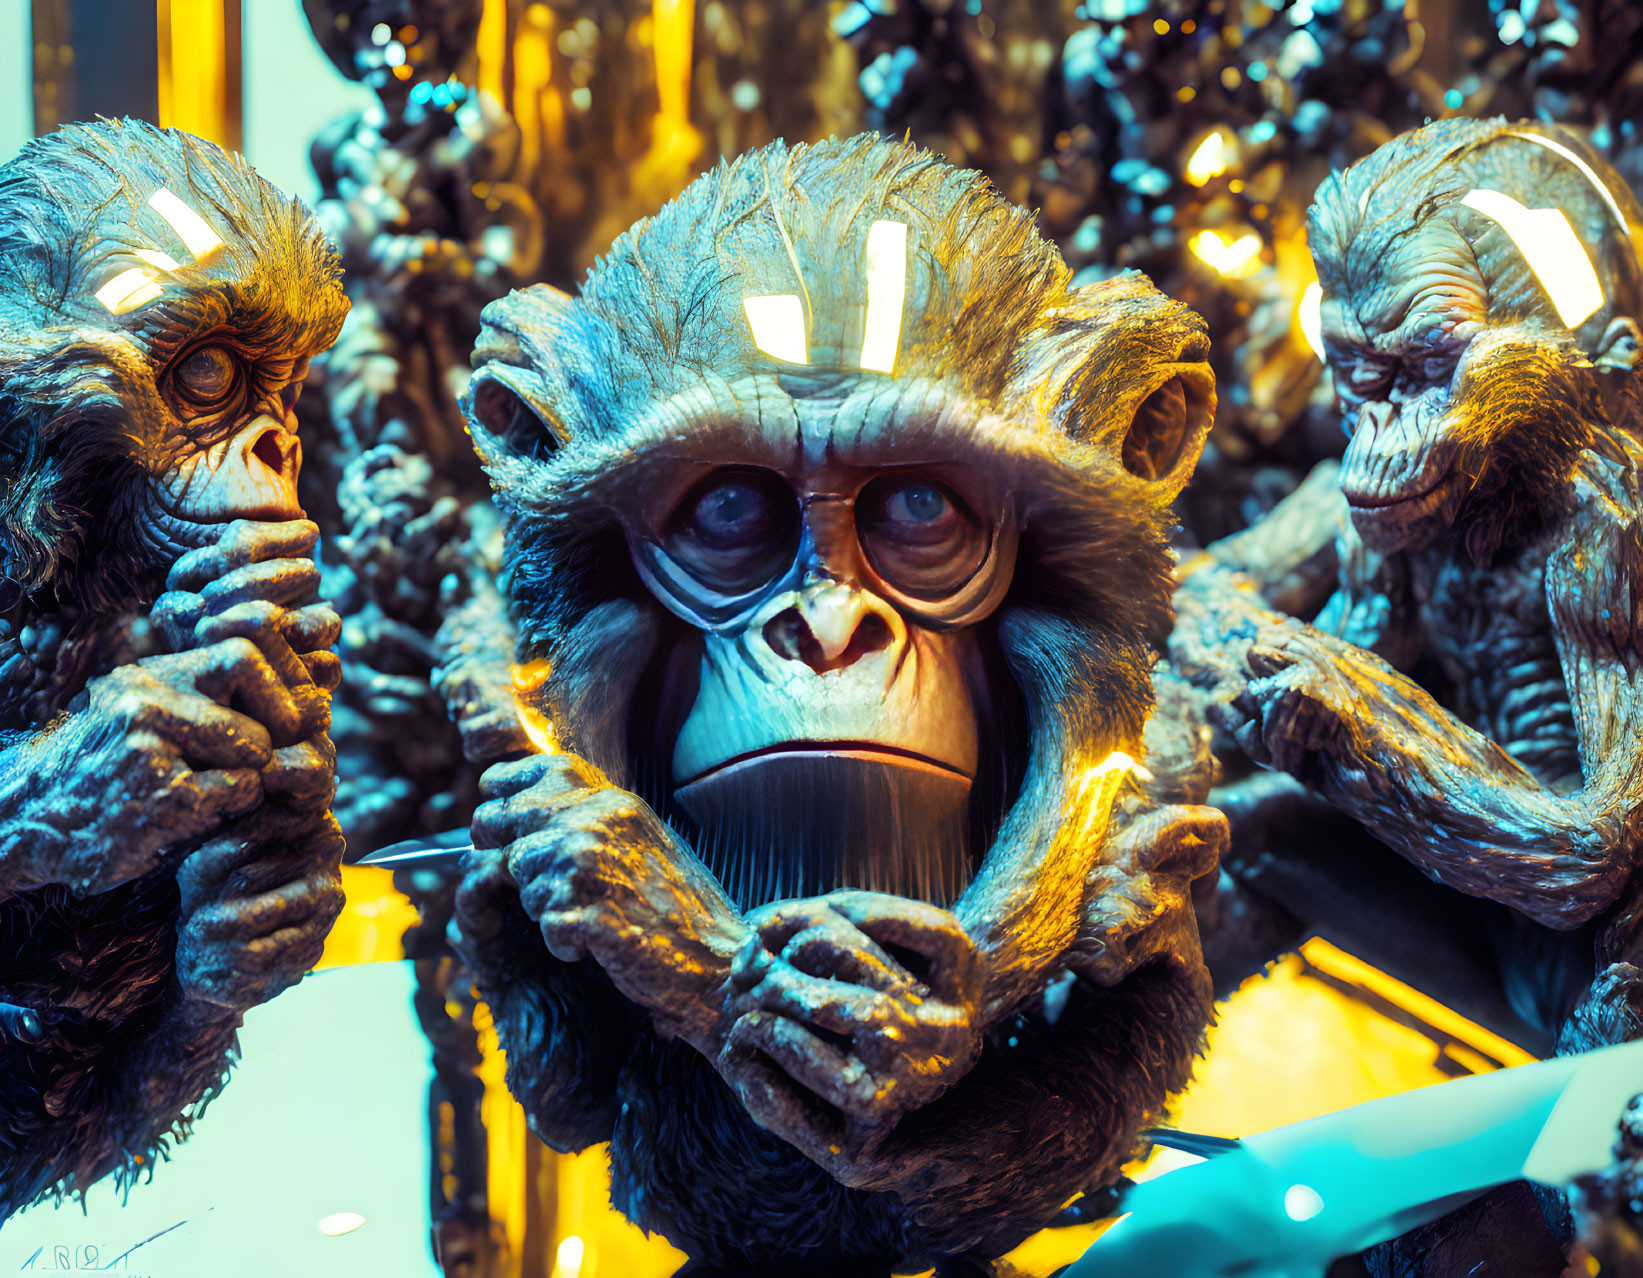 Hyper-realistic ape figures with glowing eyes on golden ornate background